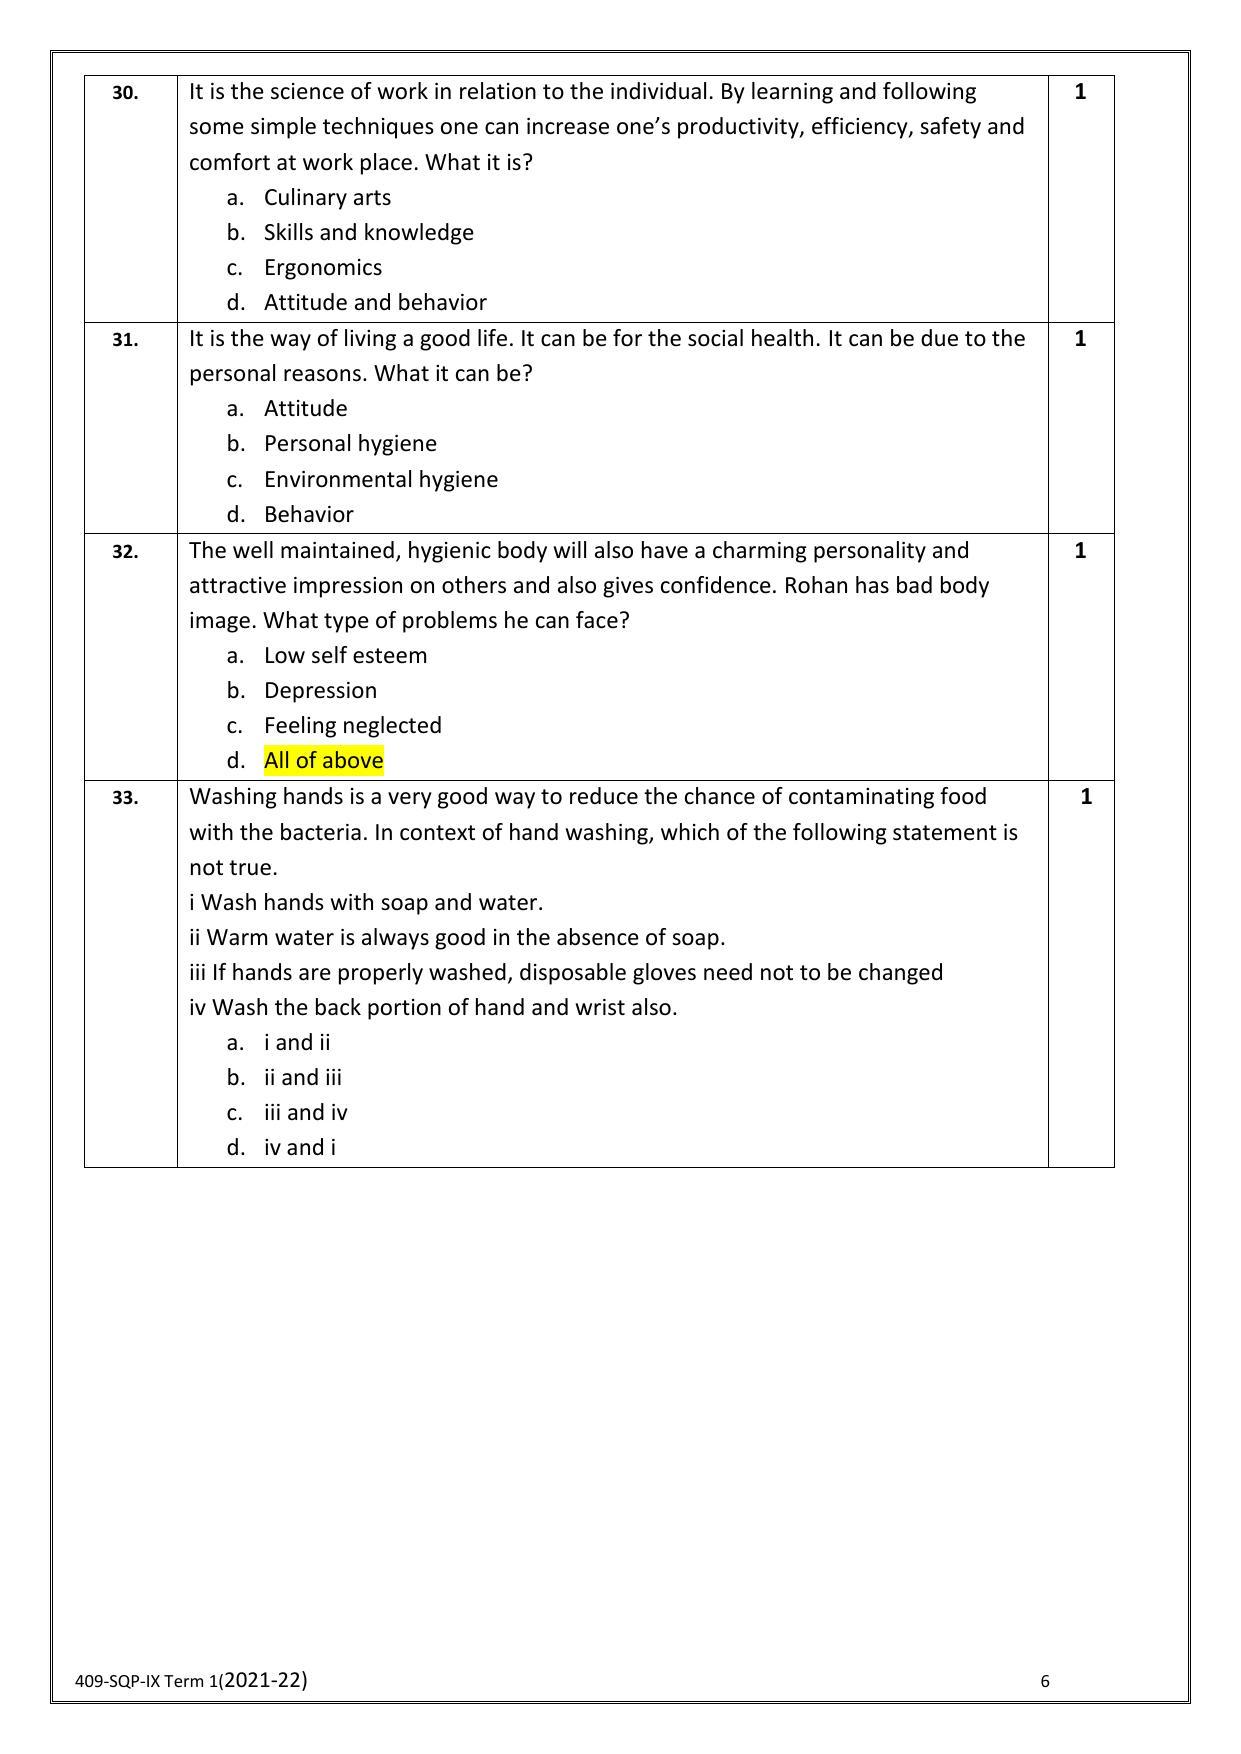 CBSE Class 10 Skill Education (Term I) - Food Production Sample Paper 2021-22 - Page 6